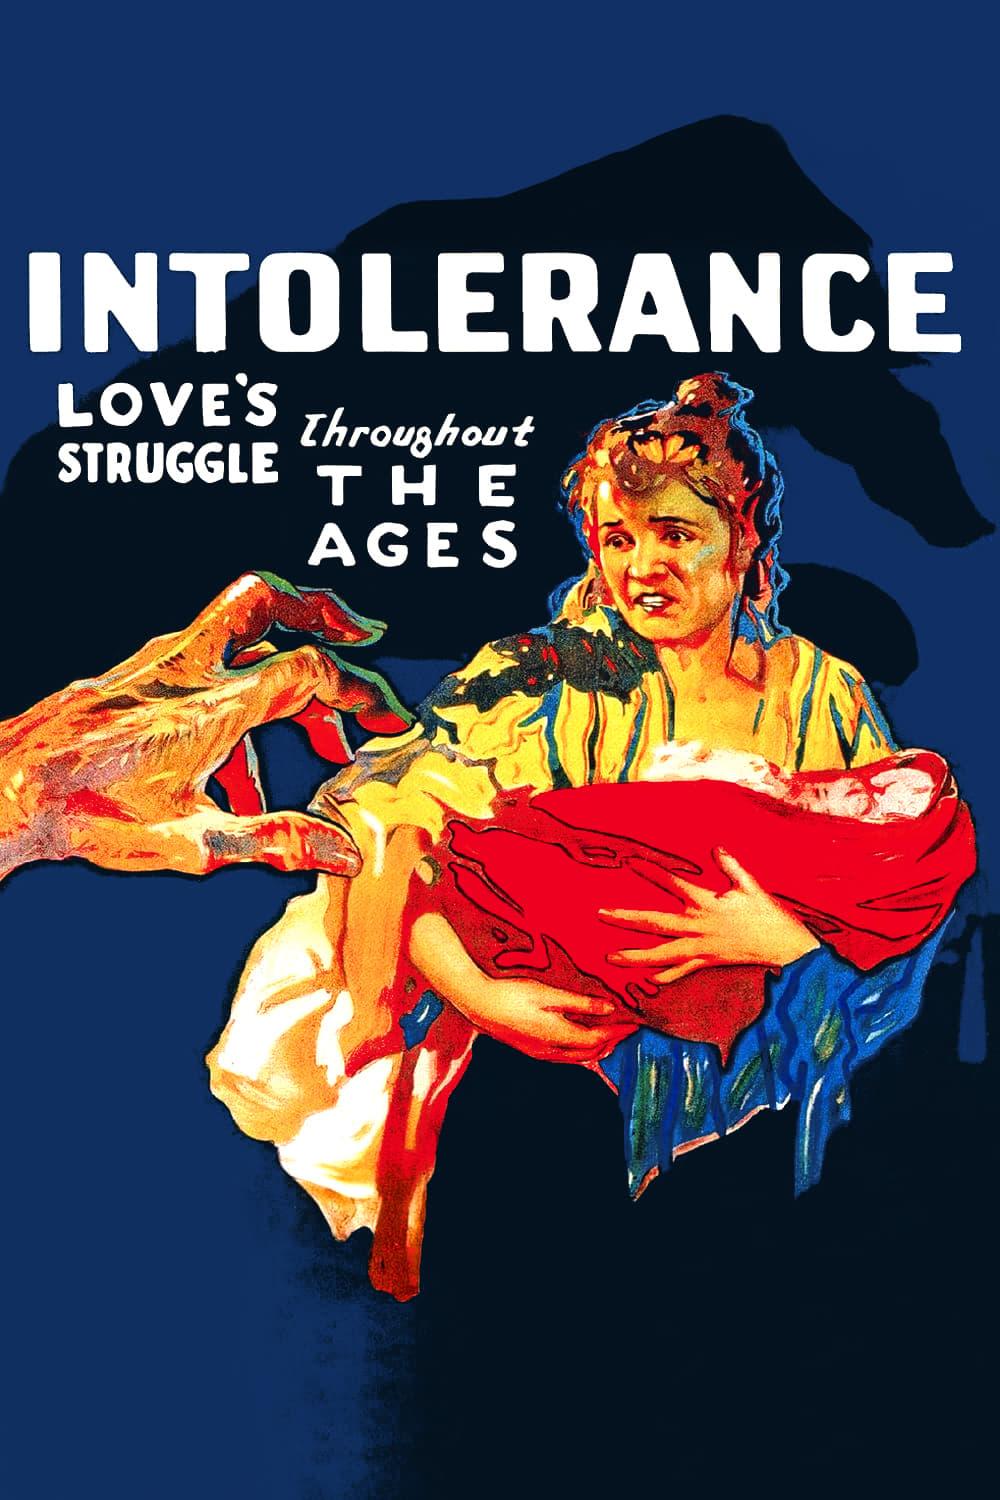 Intolerance: Love's Struggle Throughout the Ages poster